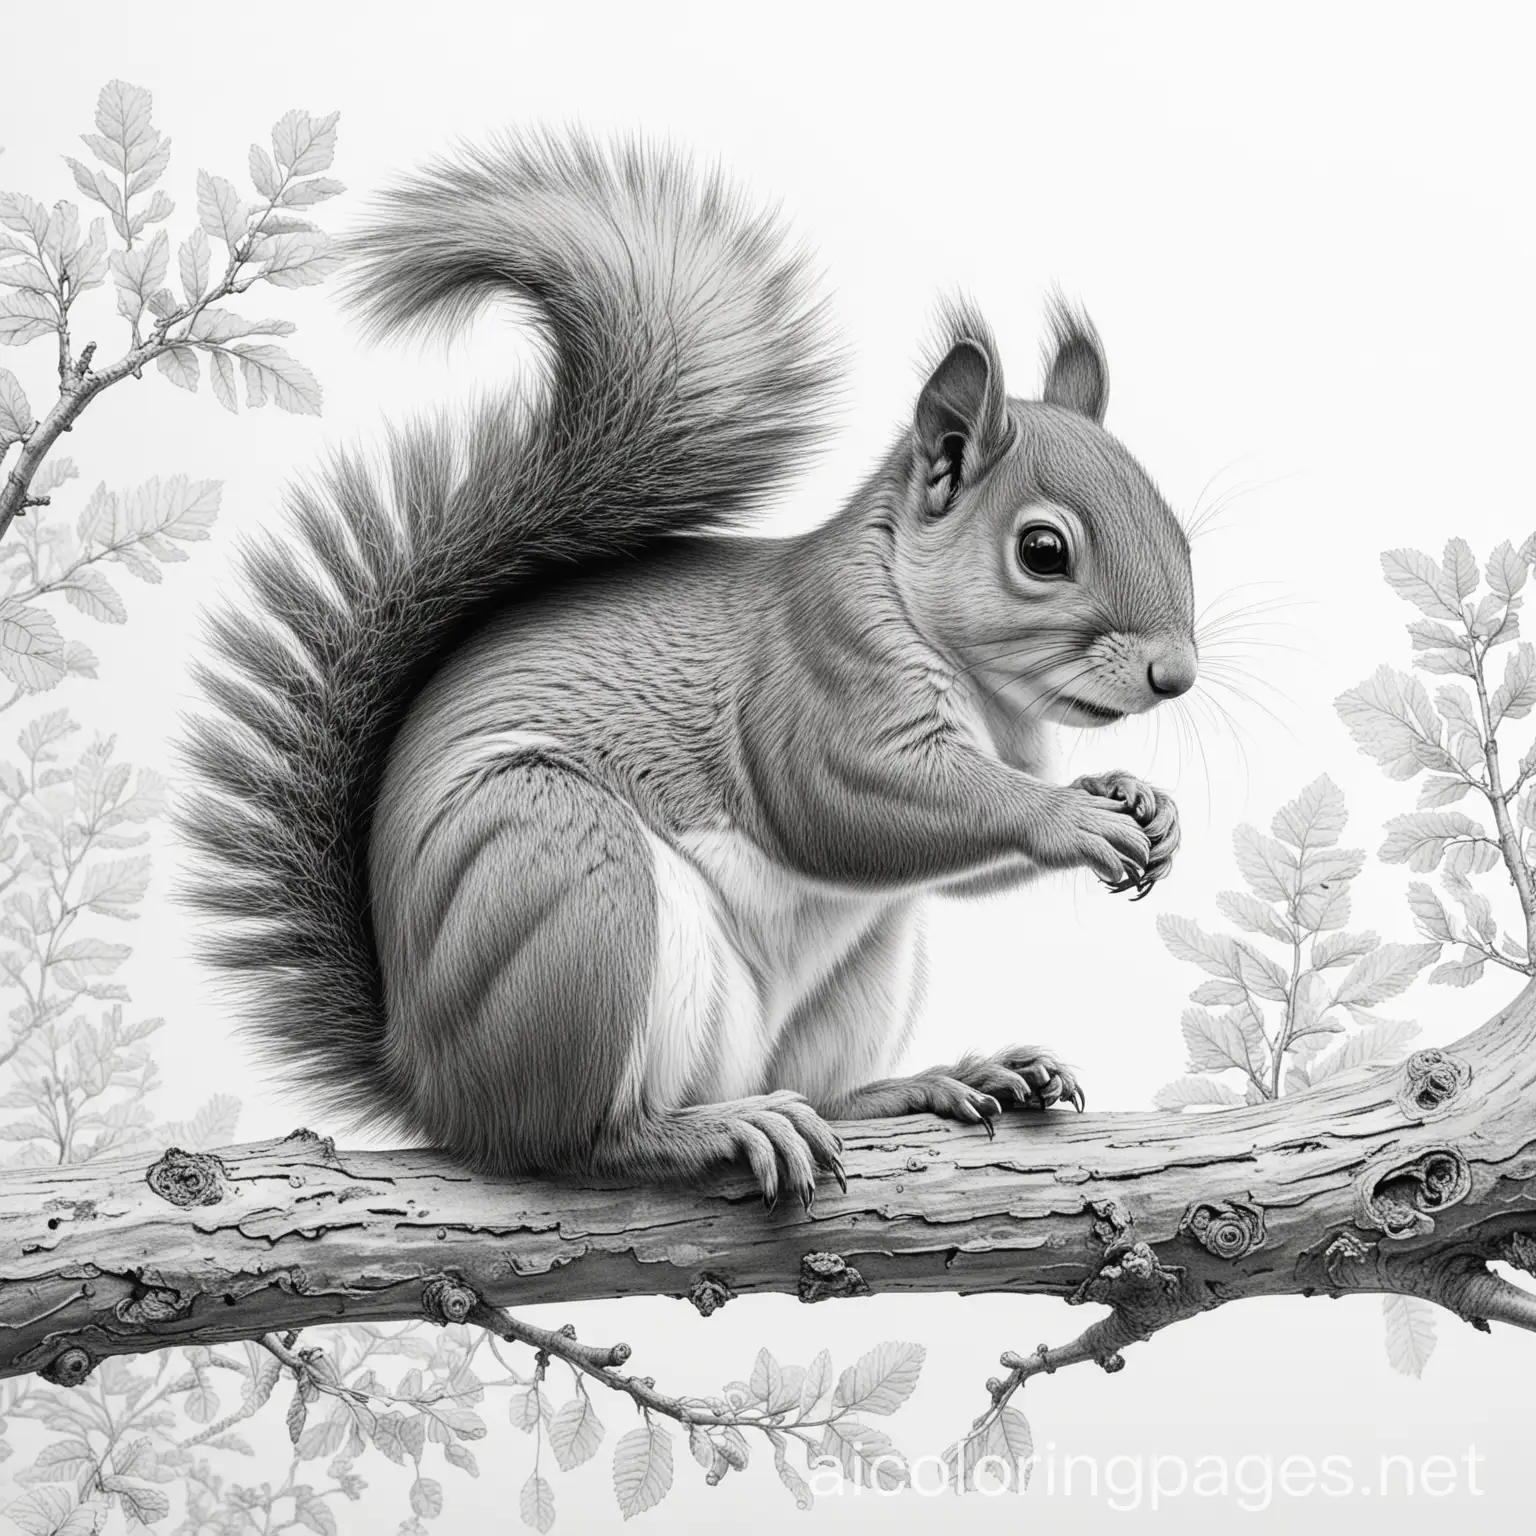 Curious-Squirrel-Balancing-on-Branch-Coloring-Page-for-Adults